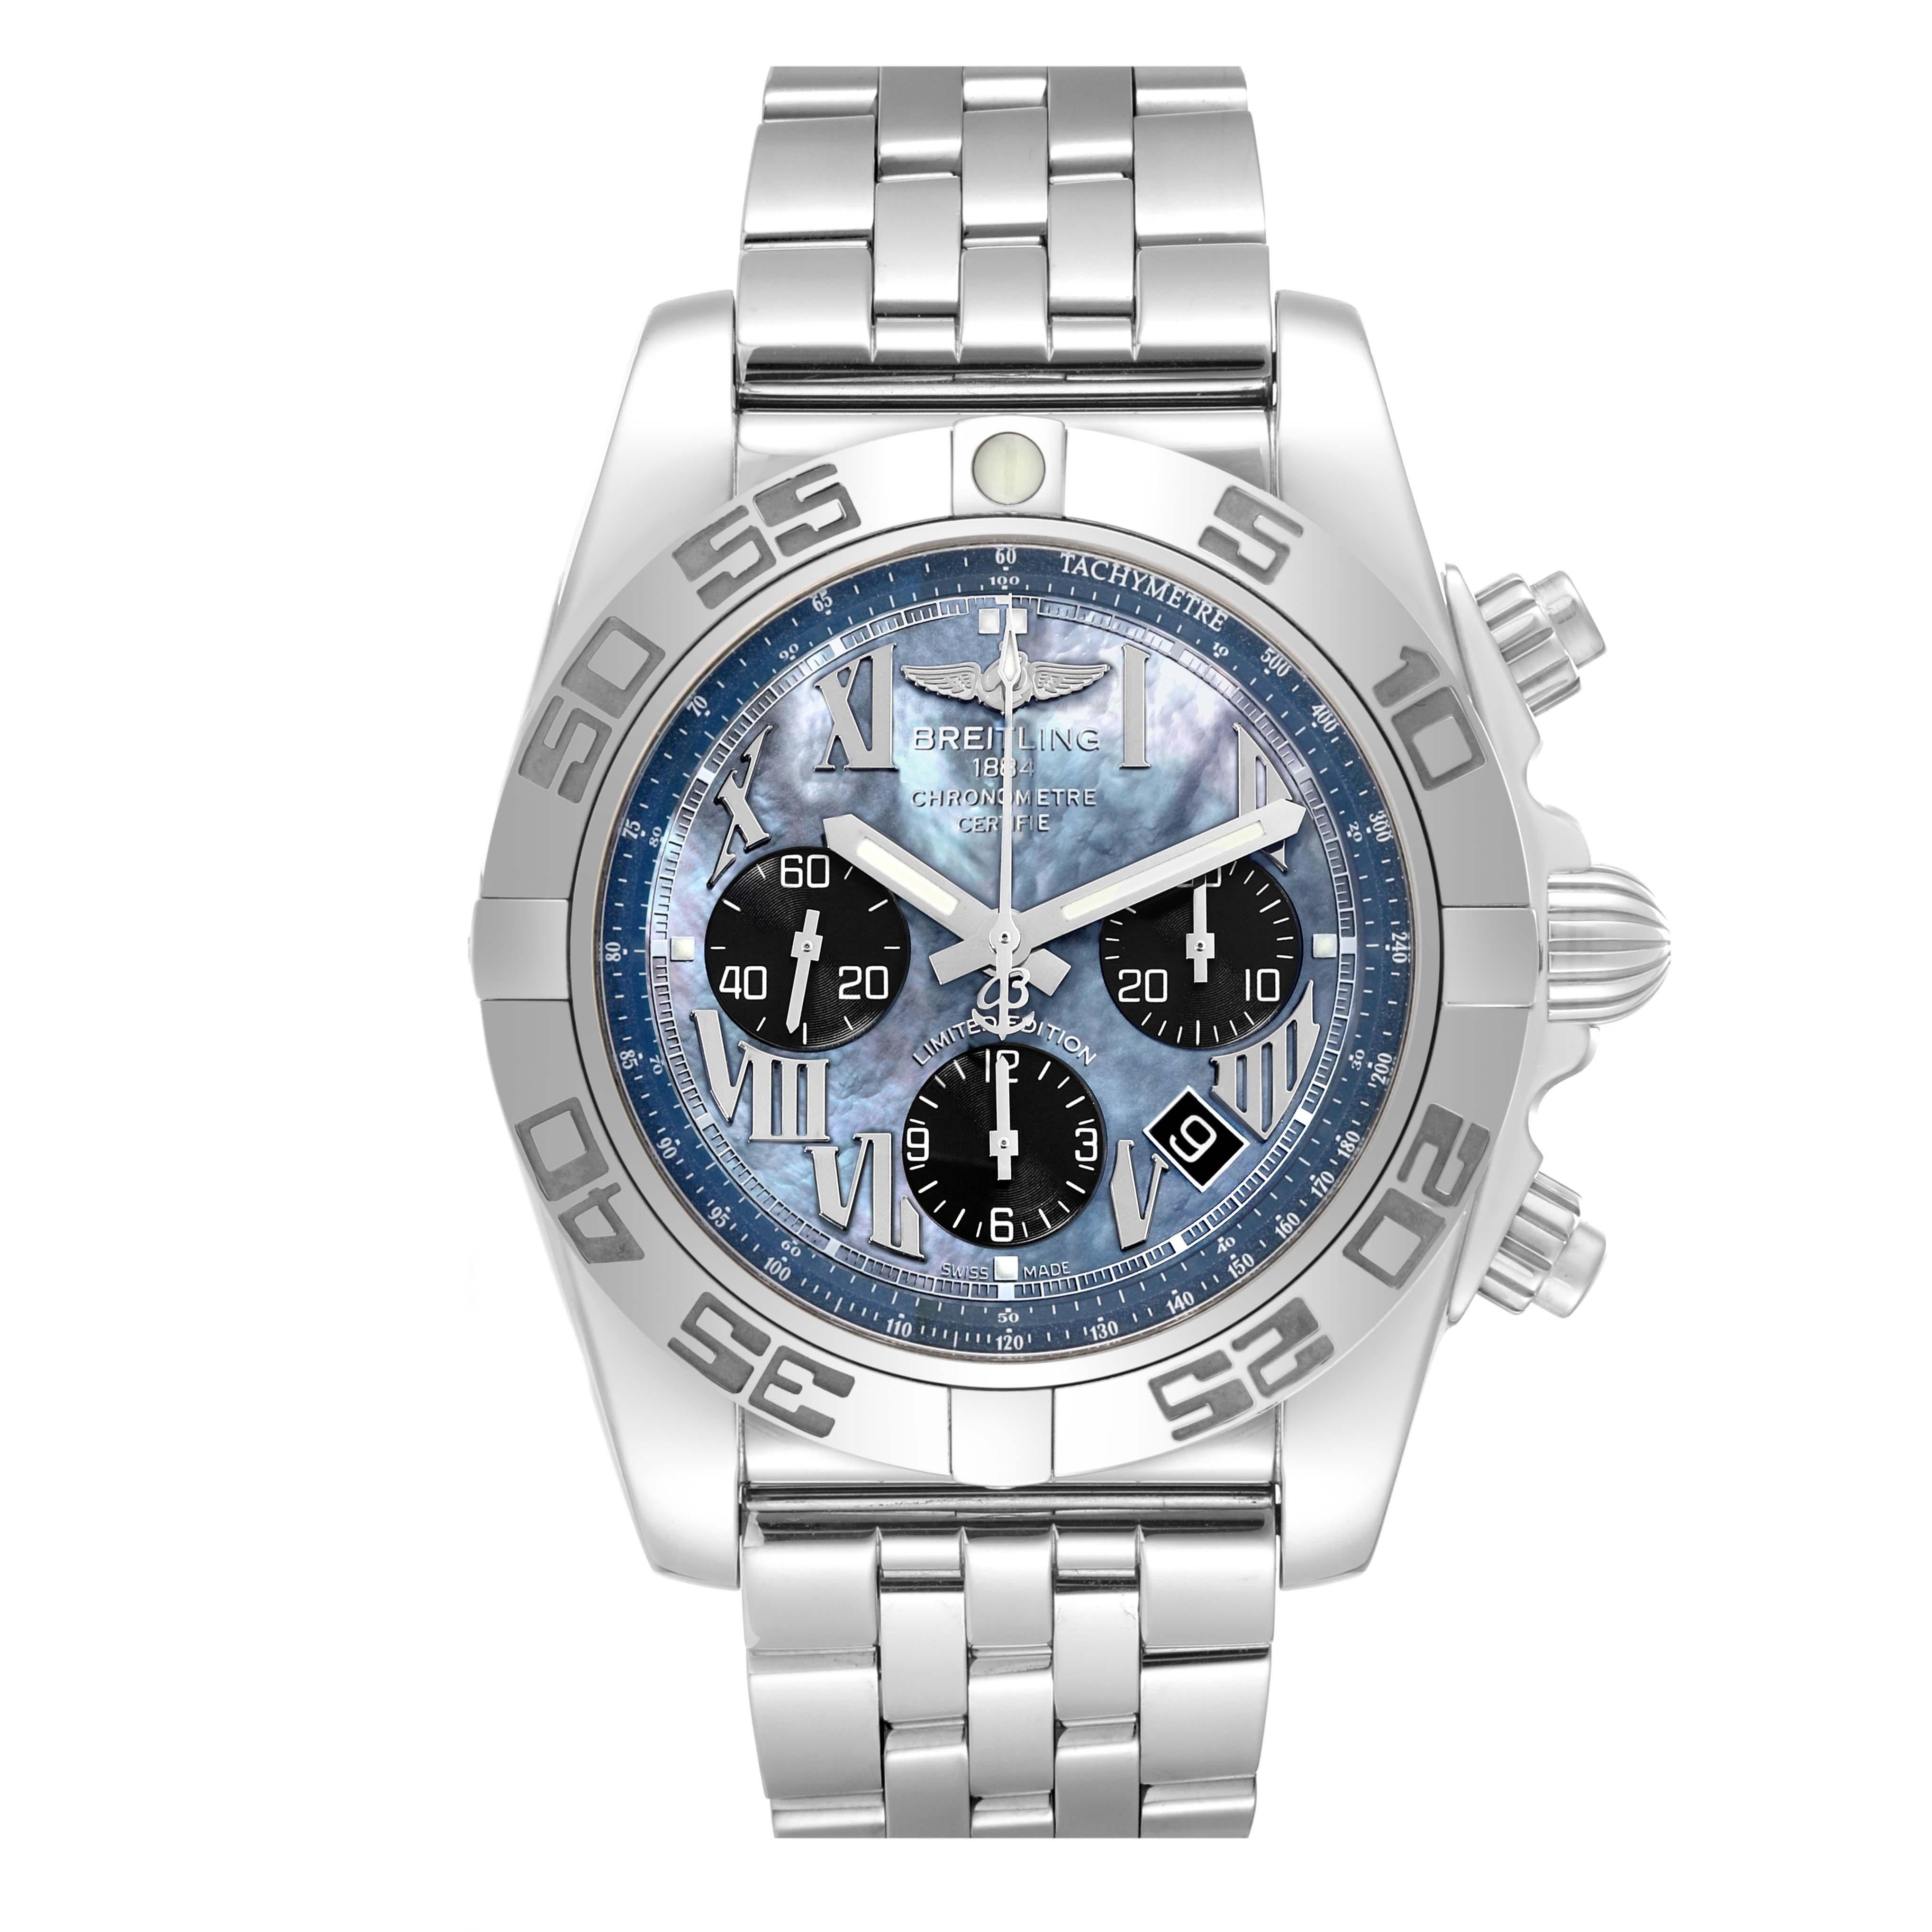 Breitling Chronomat 01 Mother of Pearl Steel Limited Edition Mens Watch For Sale 1